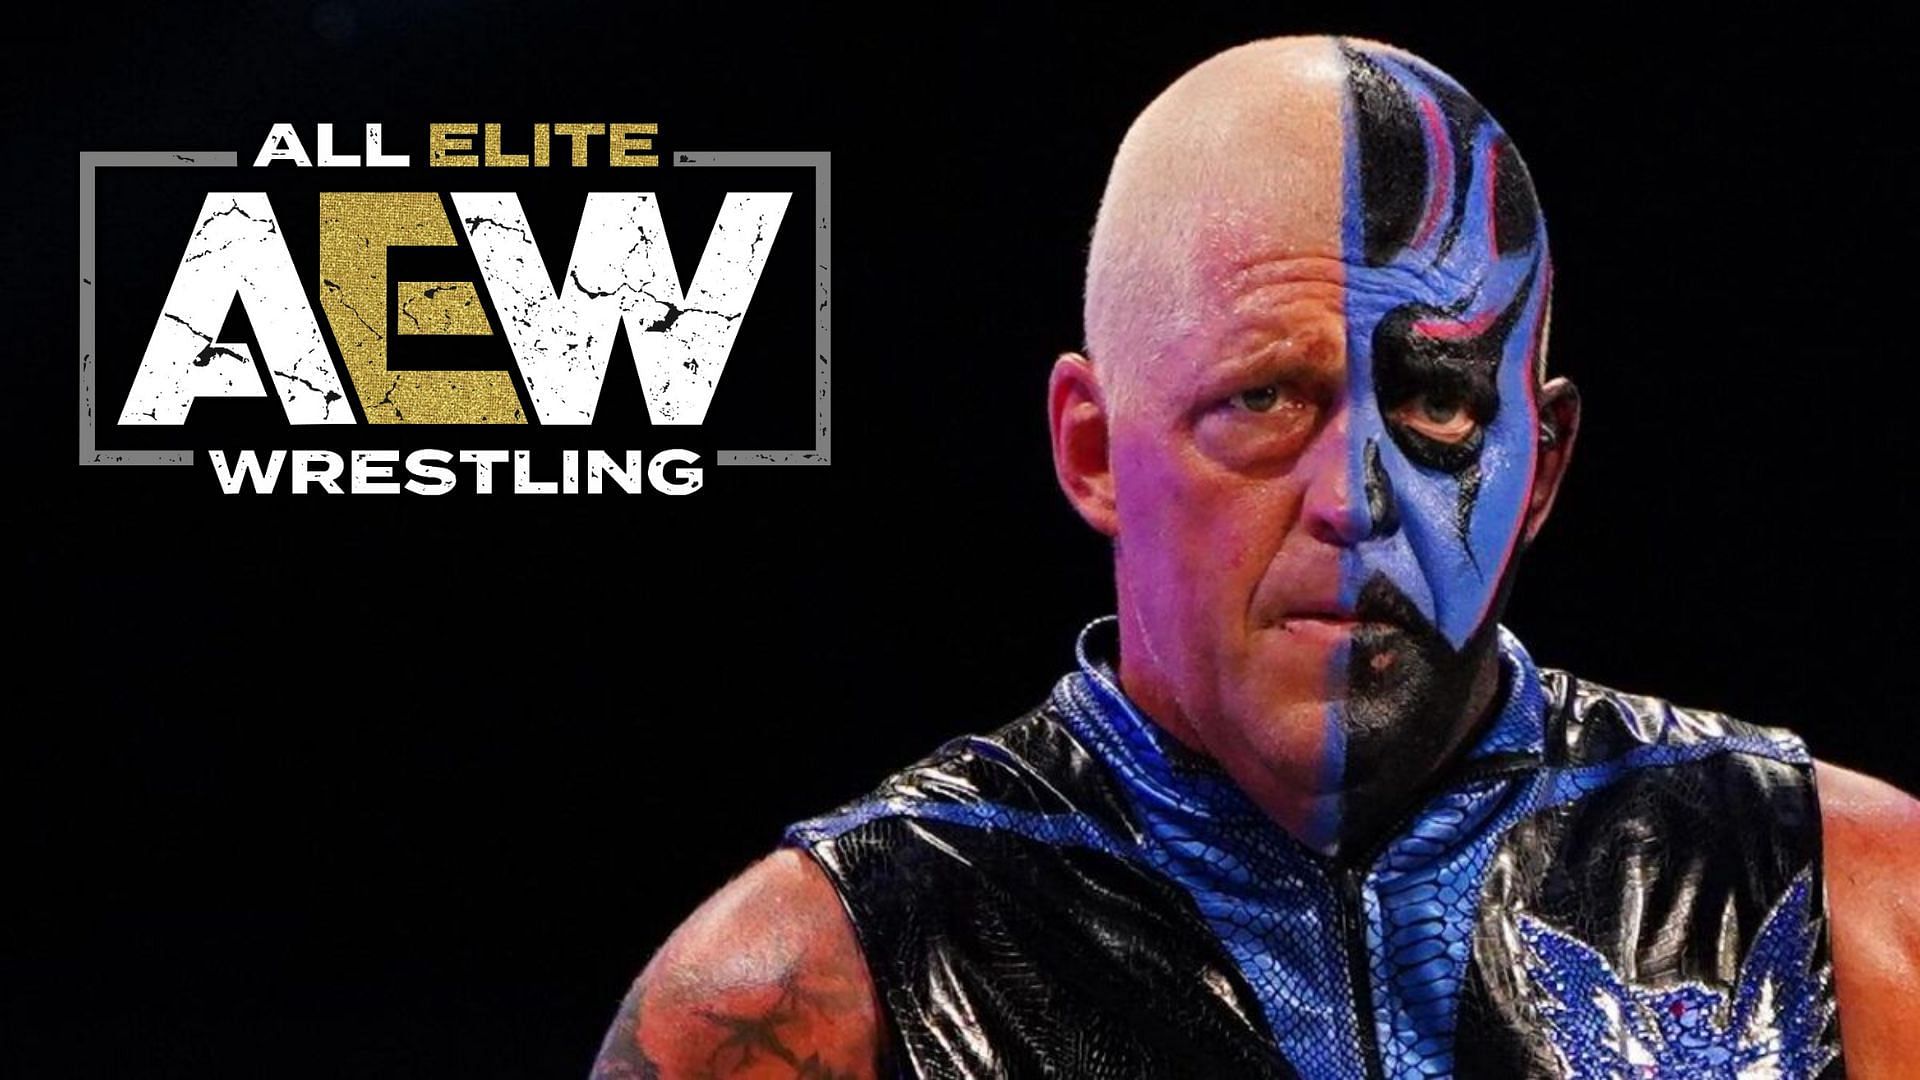 Dustin Rhodes is considered a legend of the industry by some.